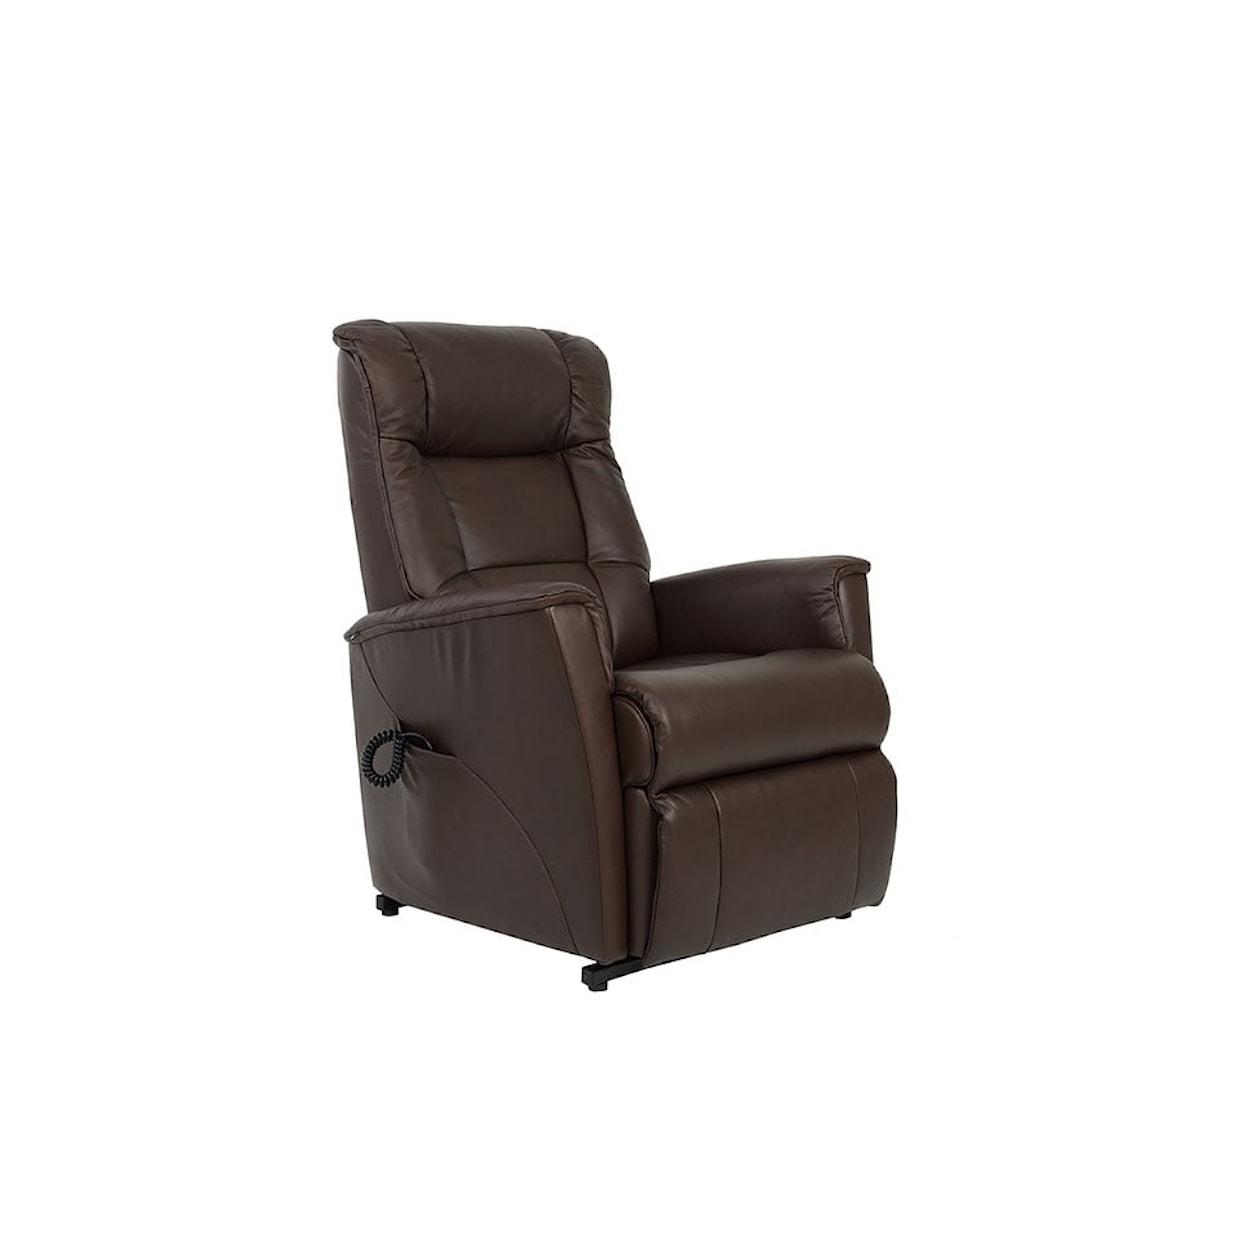 Fjords by Hjellegjerde Relax Collection Memphis Small Lift Chair